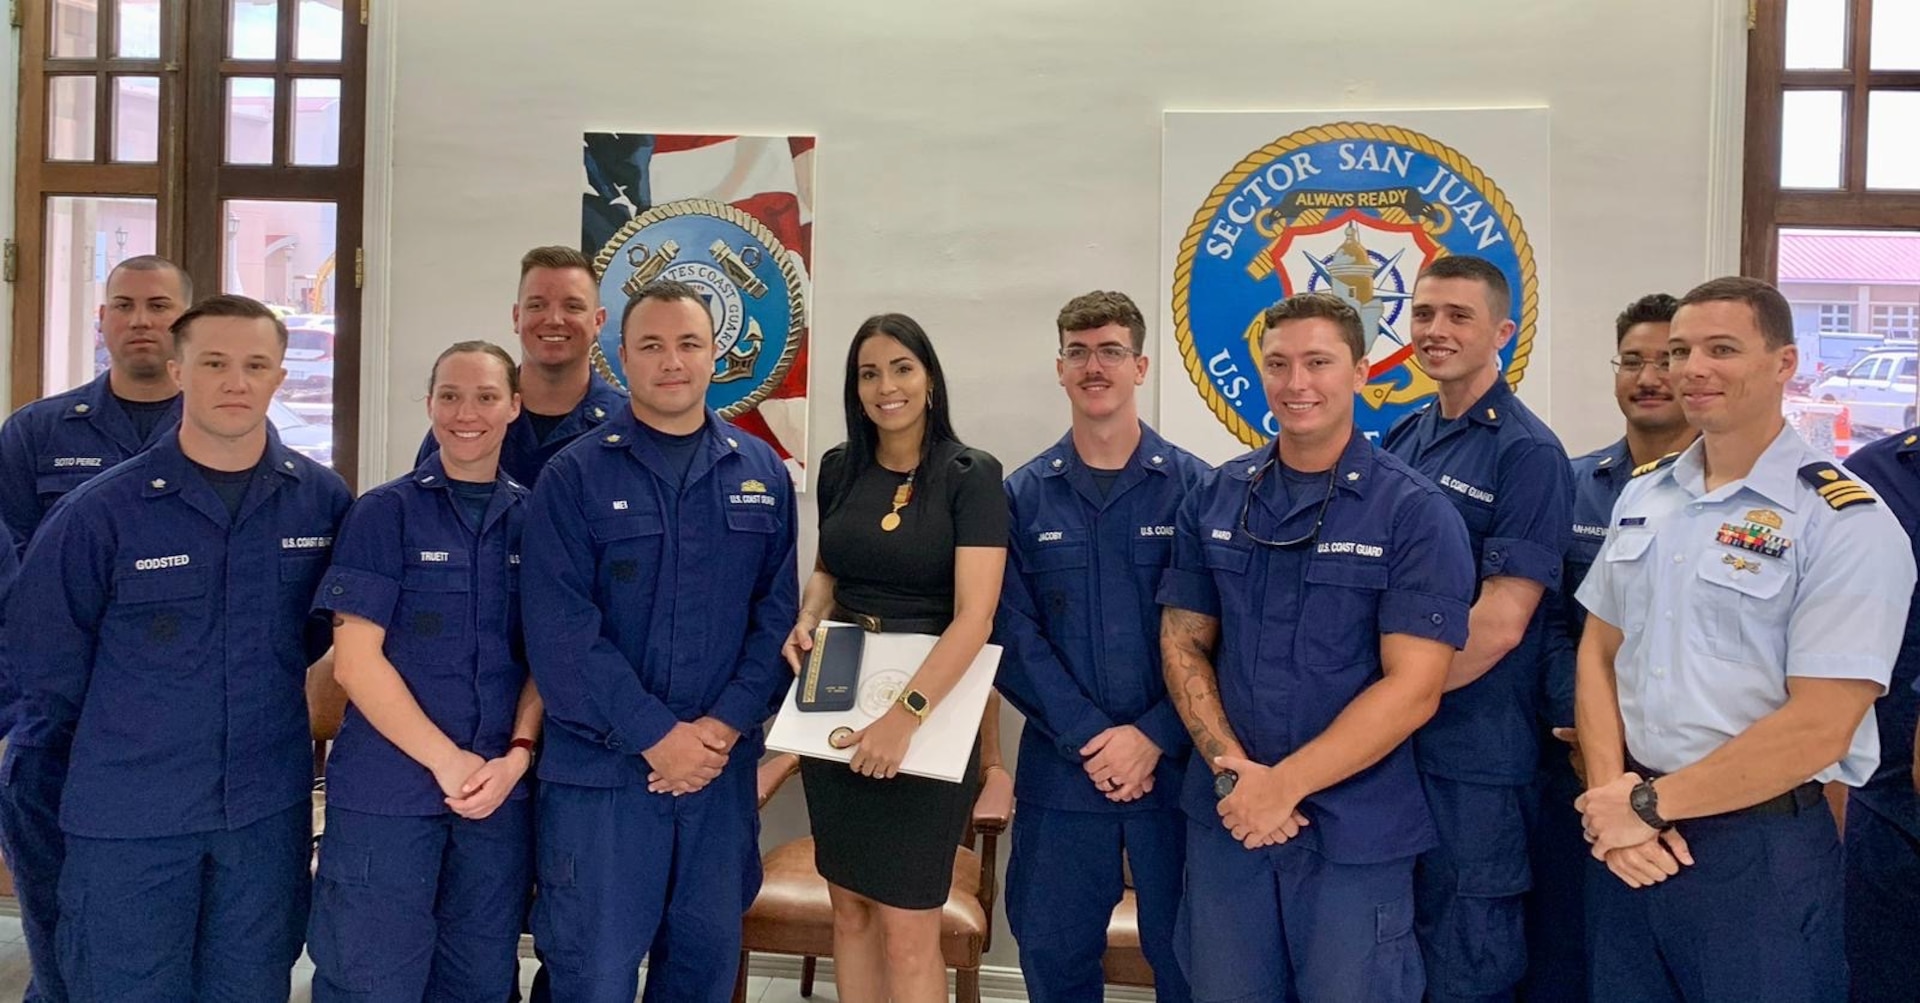 The Coast Guard presented the Gold Life Saving Medal to a Puerto Rican woman at Coast Guard Base San Juan, April 26, 2024. Aivelyn Díaz Rosado, 39, a resident of Toa Baja, Puerto Rico, was awarded the Gold Lifesaving Medal for her heroic actions on April 21, 2014, in which three children were saved from strong rip currents off a beach in Dorado, Puerto Rico.